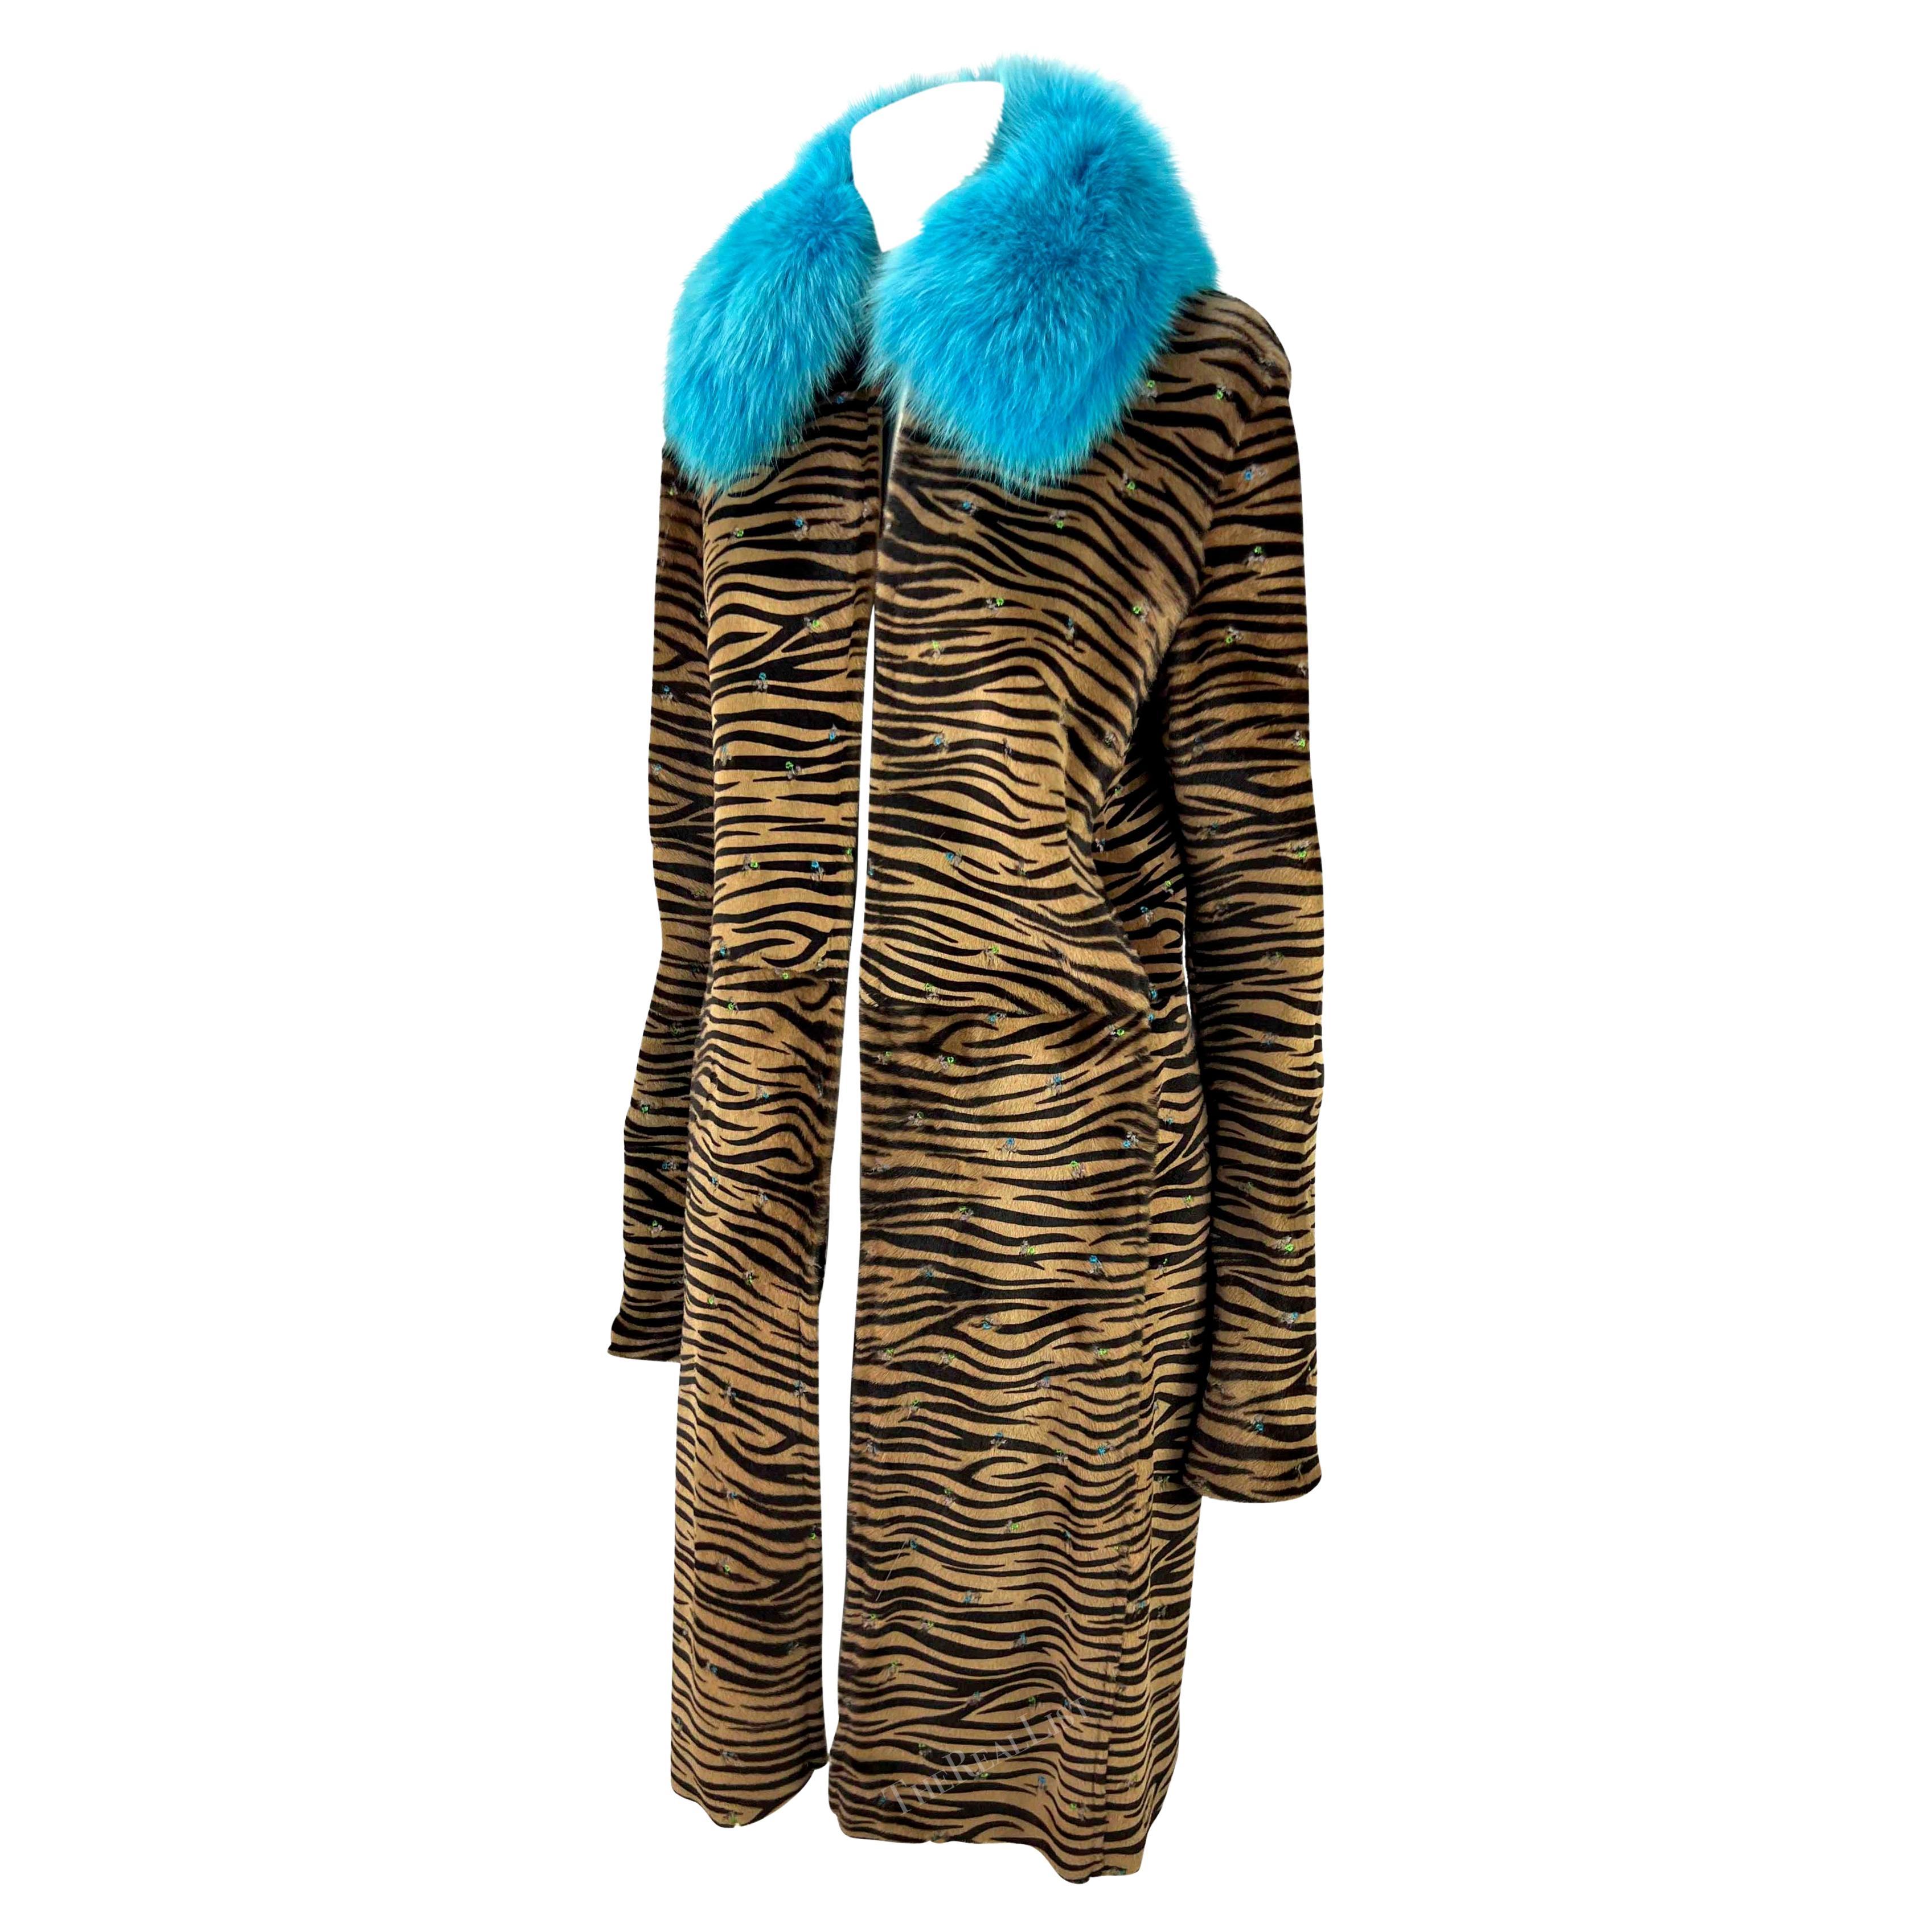 F/W 1999 Gianni Versace by Donatella Embroidered Pony Hair Blue Fox Fur Coat For Sale 5